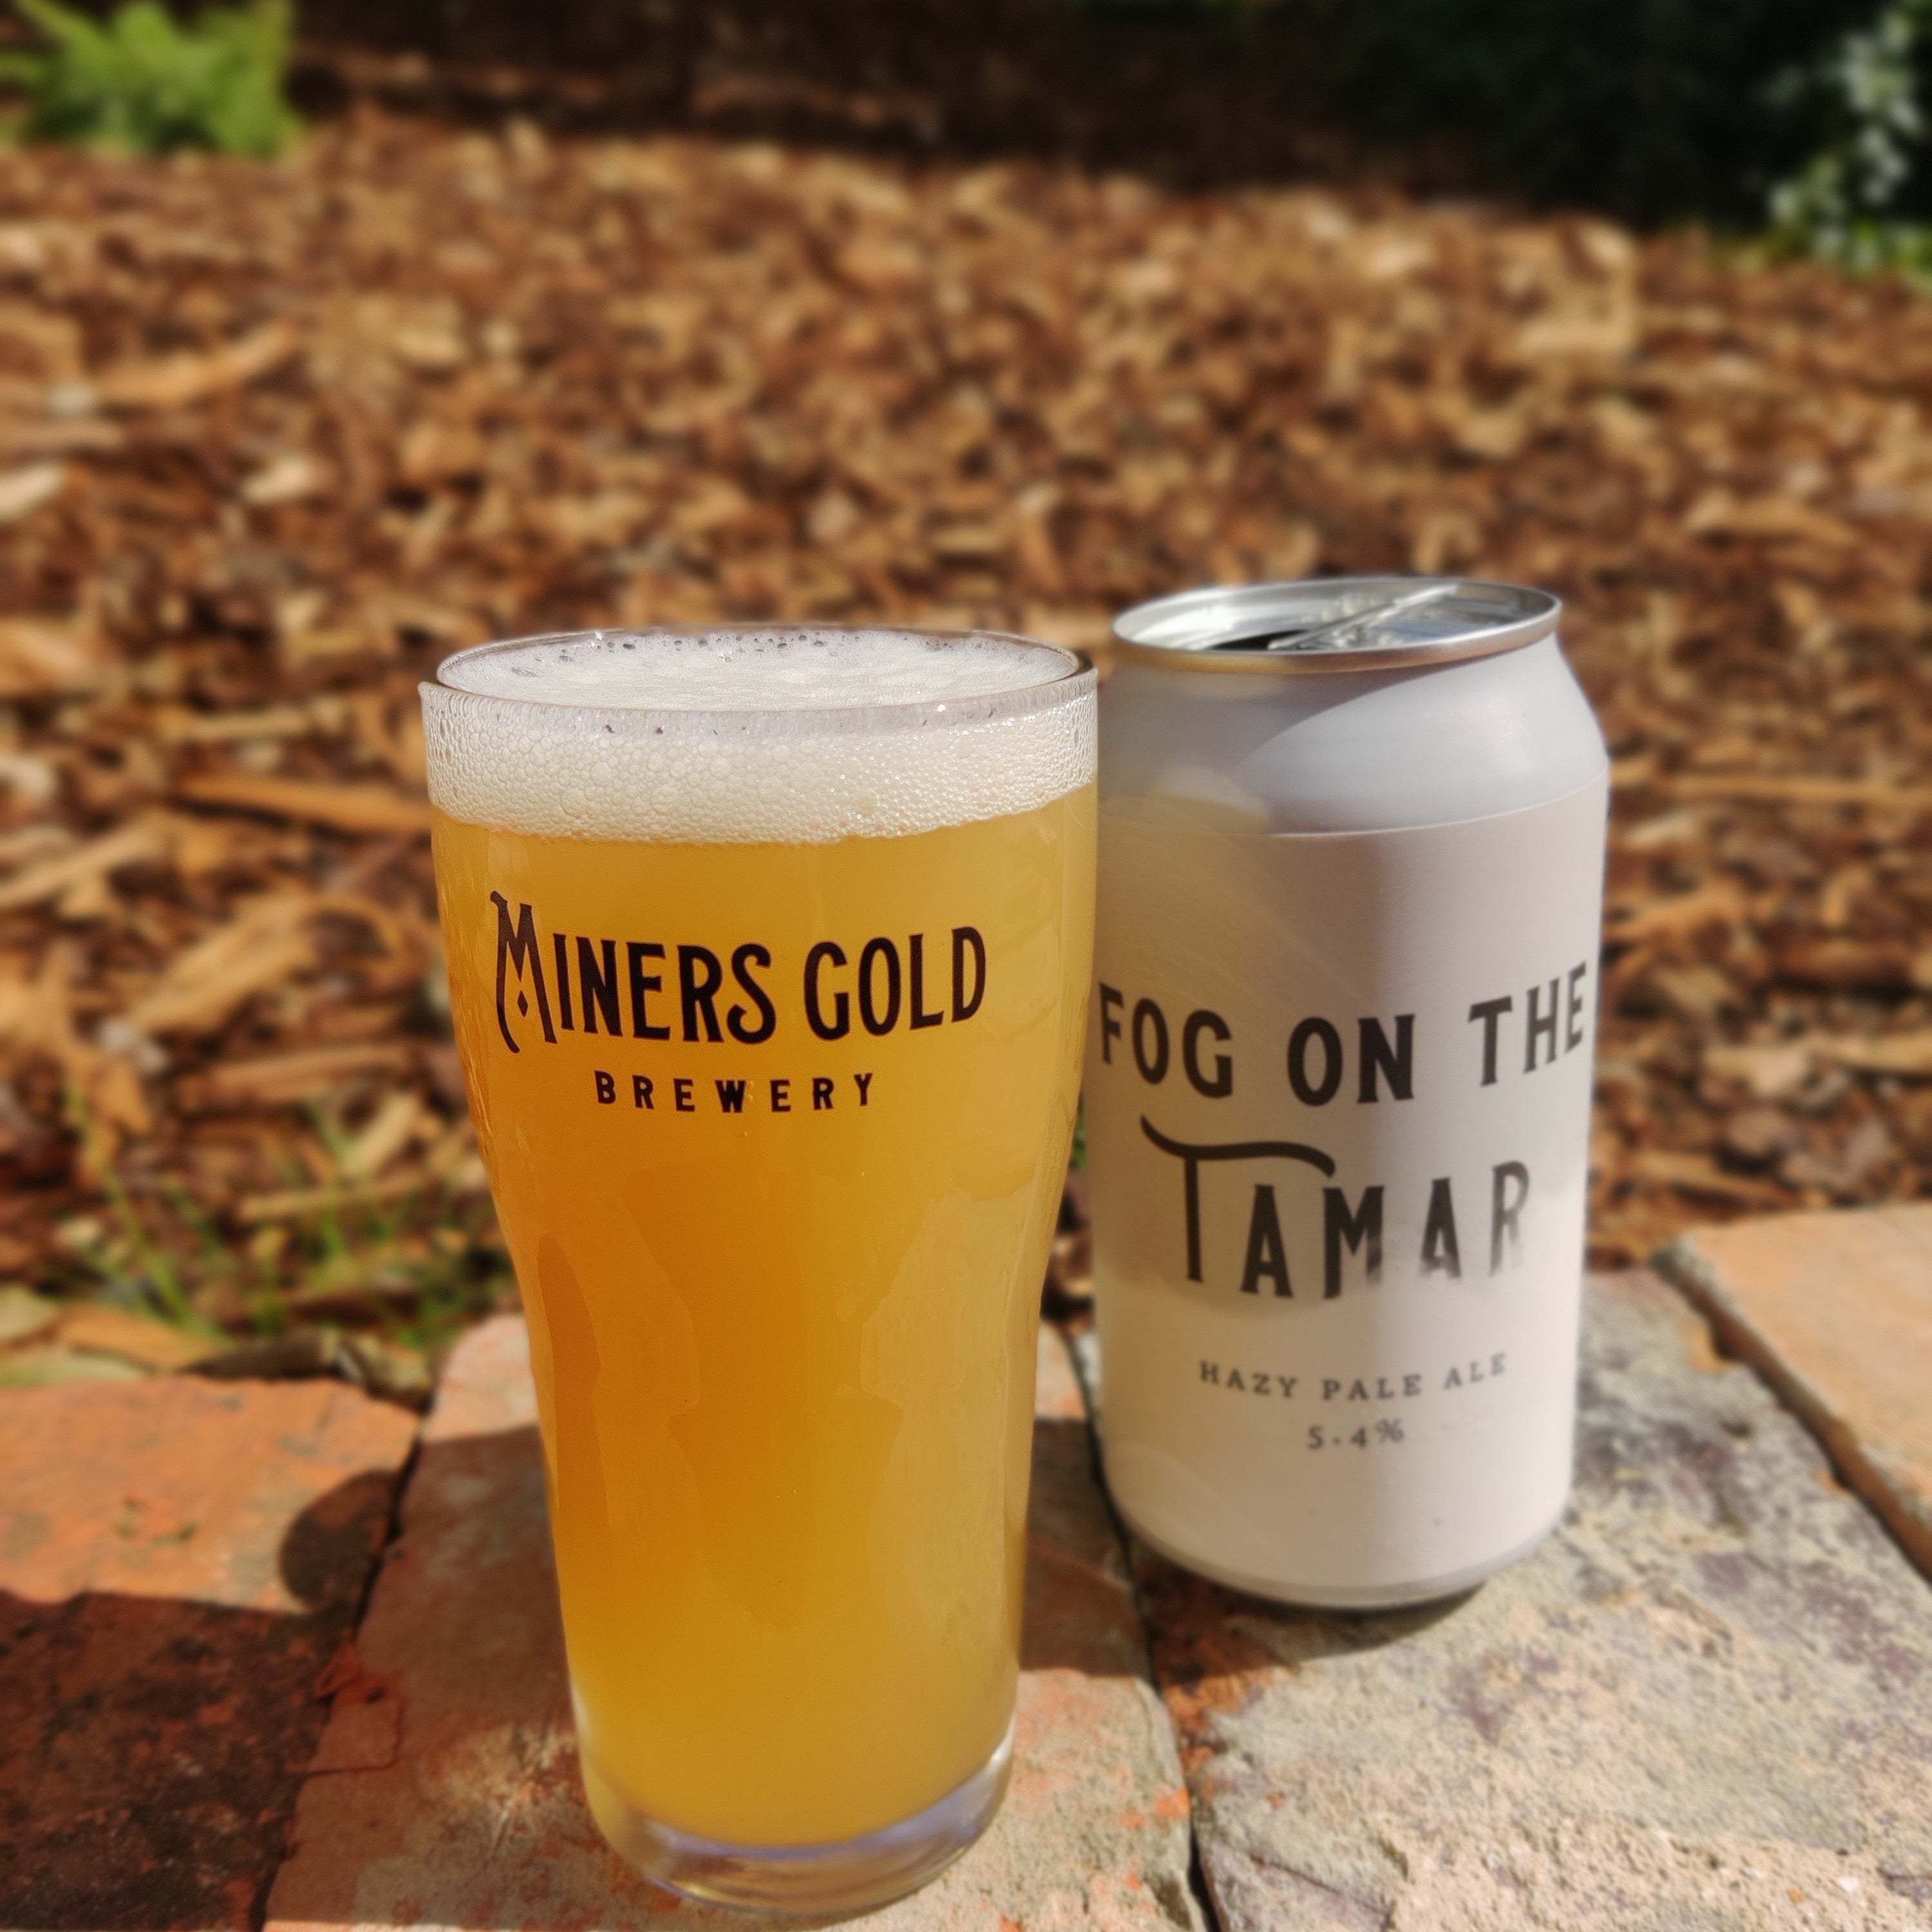 This is a photo of a white can of beer and a glass of beer that has been made by Miners Gold Brewery. It is called Fog On The Tamar. The beer is a Hazy Pale Ale and is 5.4% ABV. 